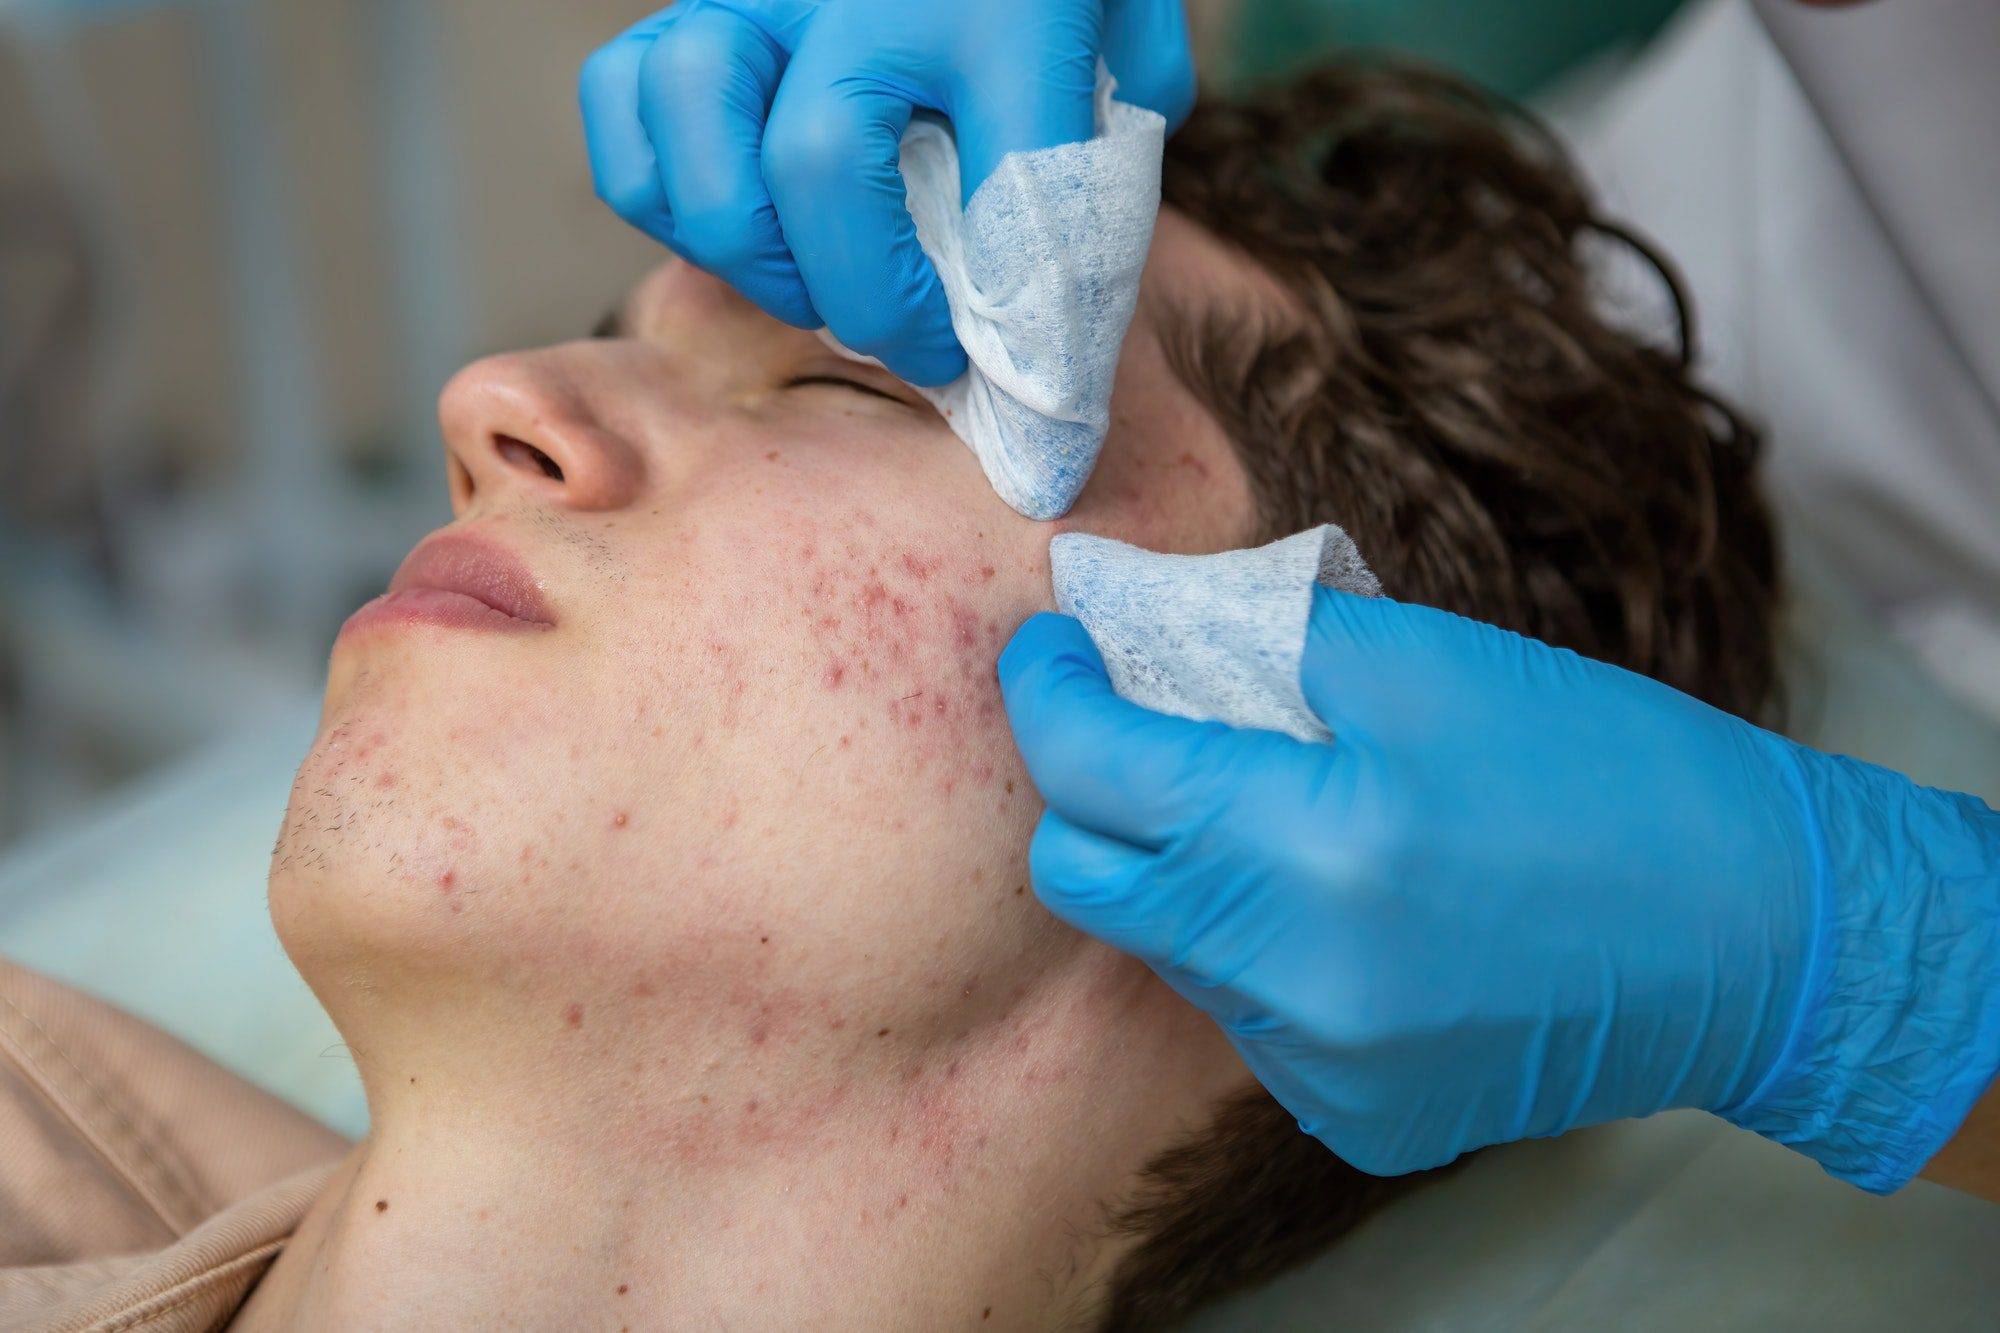 Treatment of acne in adolescents. Facial peeling to fight acne on the face